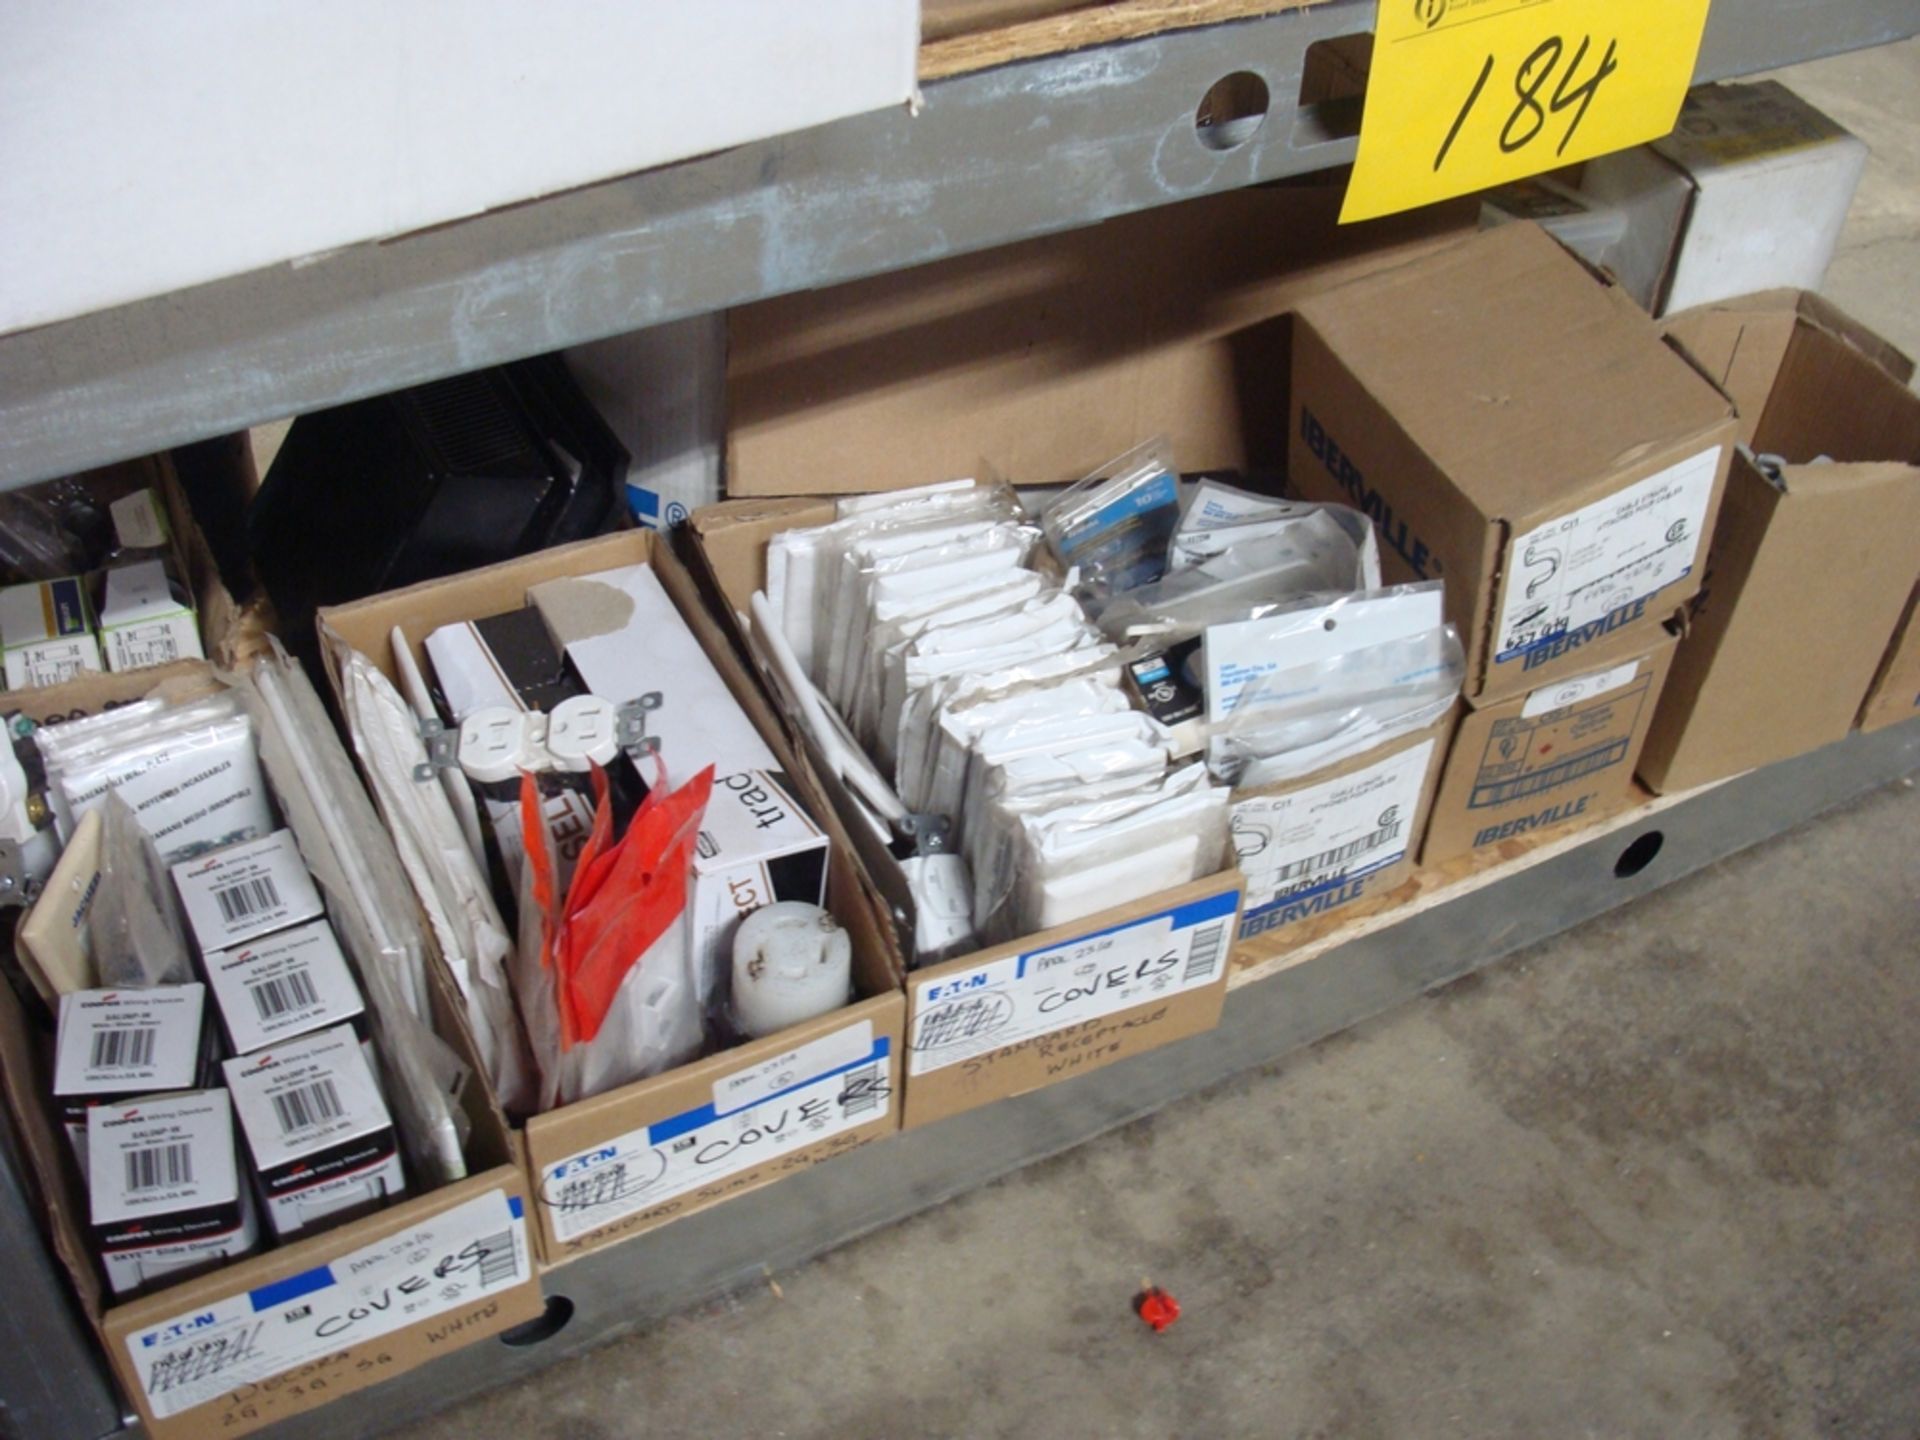 LOT OF ASST. OCTAGONAL BOXES, DEVIS BREAKER AND STUD BREAKER BOXES, CONNECTORS, COVERS, 600V - Image 5 of 9